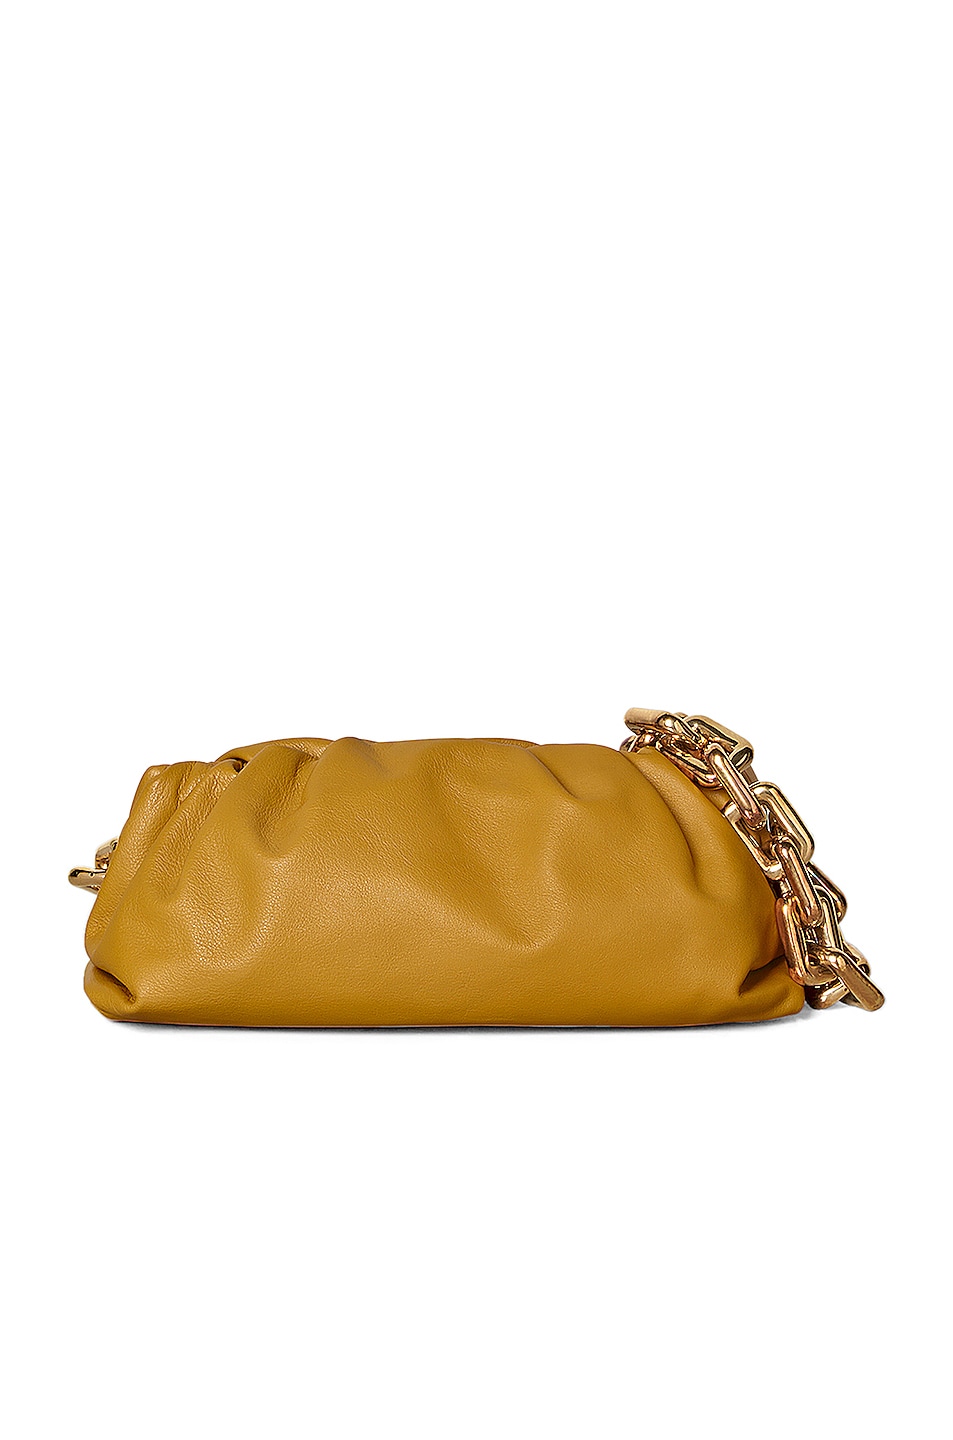 The Chain Pouch Bag in Brown